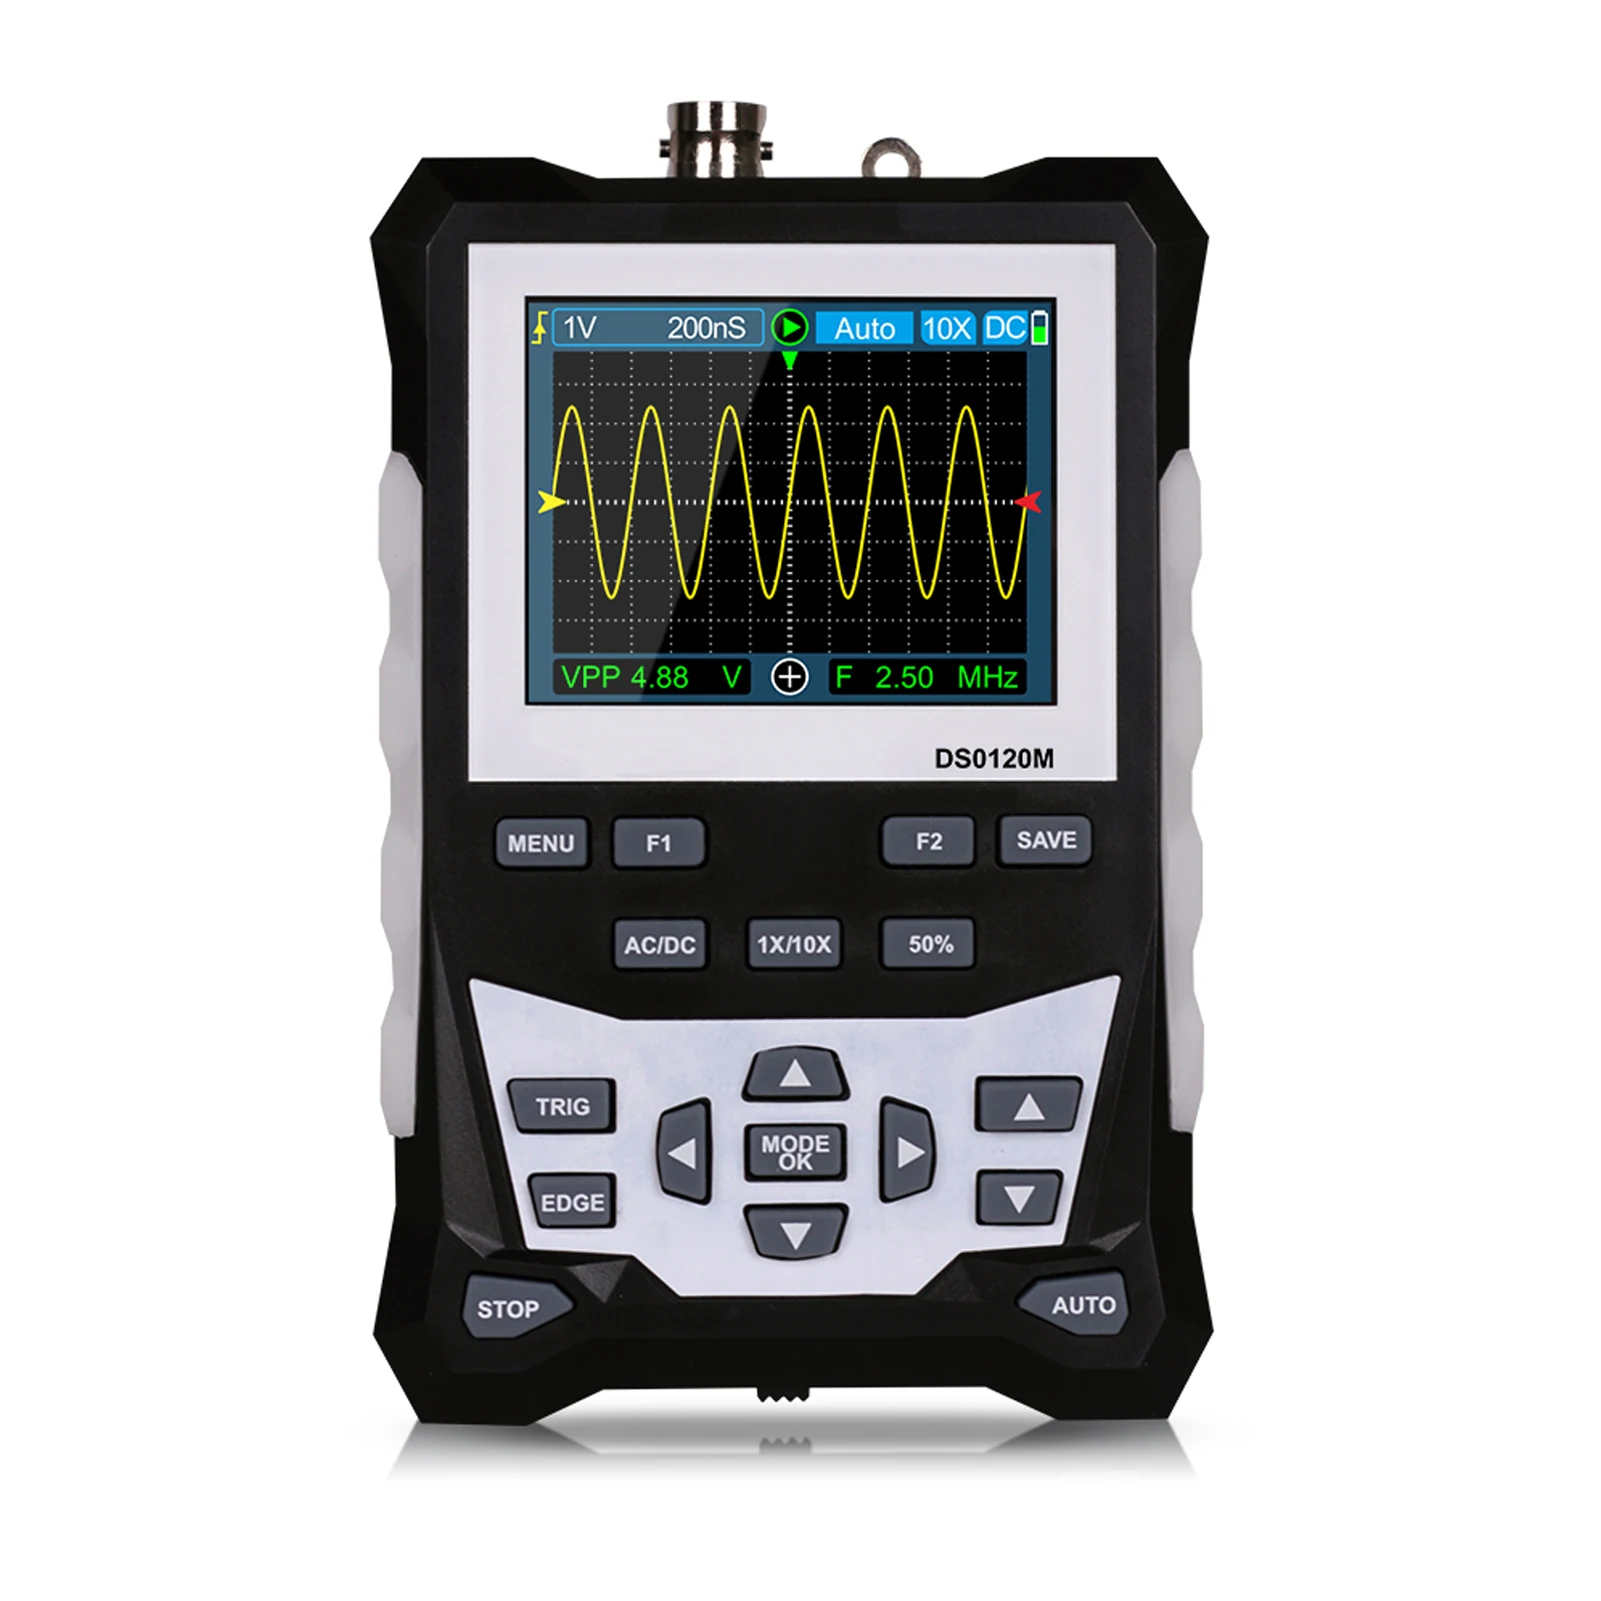 ET120M 320x240 2.4 Inch Color Screen Handheld Digital Analog Oscilloscope 120MHz Frequency 500Msps Sampling Rate Professional